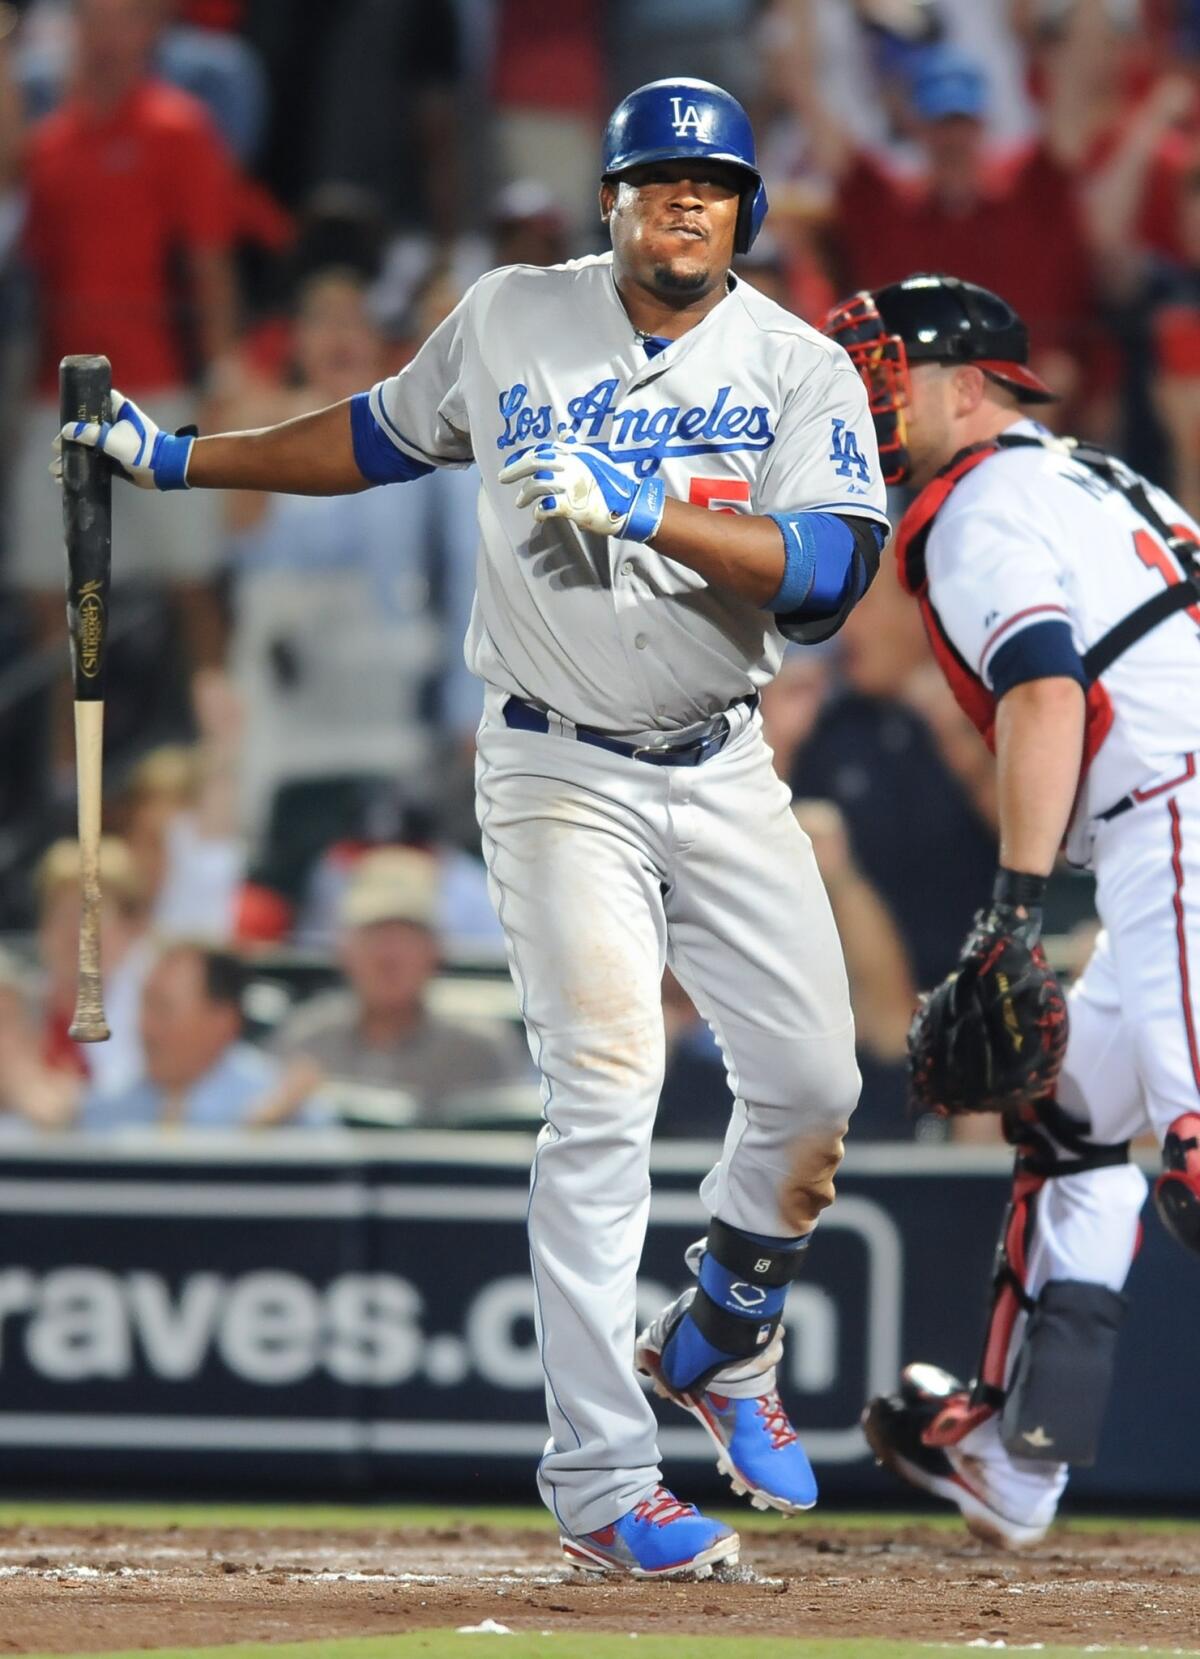 Dodgers third baseman Juan Uribe strikes out with two runners on base during the sixth inning of the Dodgers' 4-3 loss to the Atlanta Braves in Game 2 of the National League division series Friday.